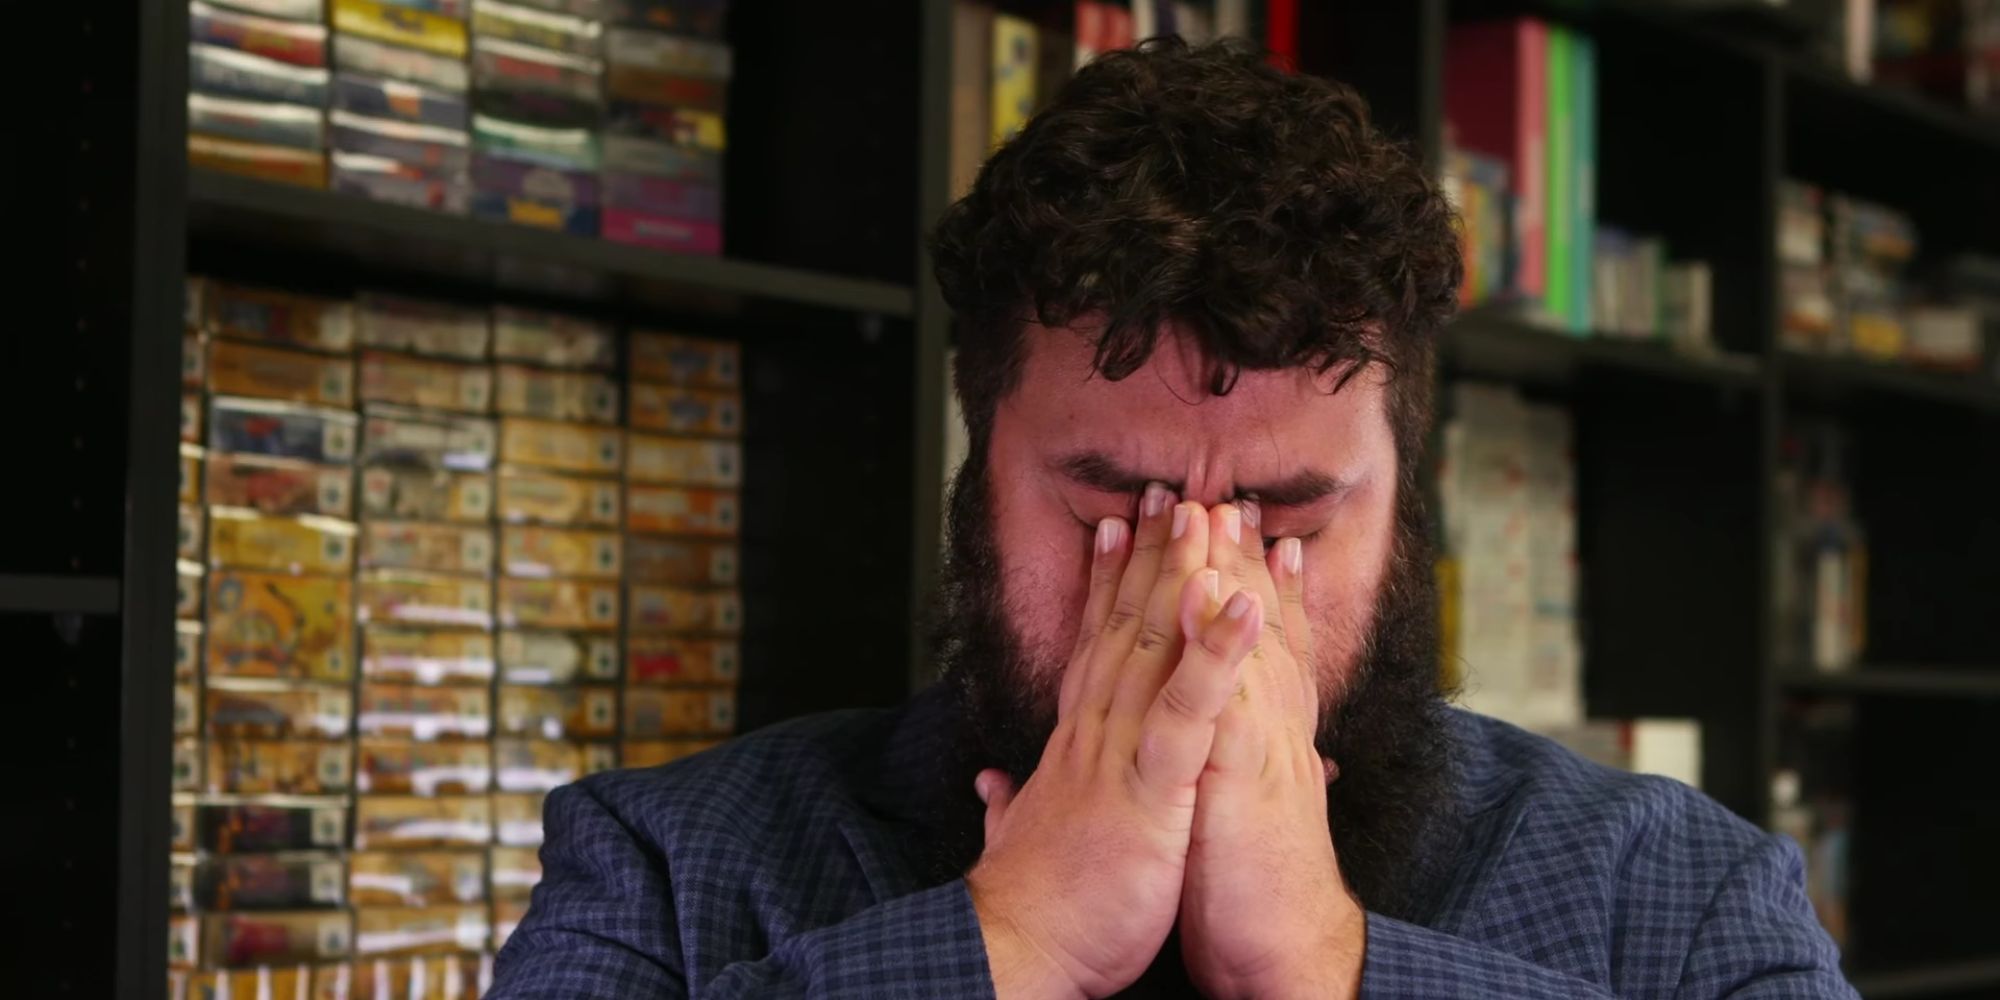 The Completionist after having spent 23k on Wii U and 3DS games.